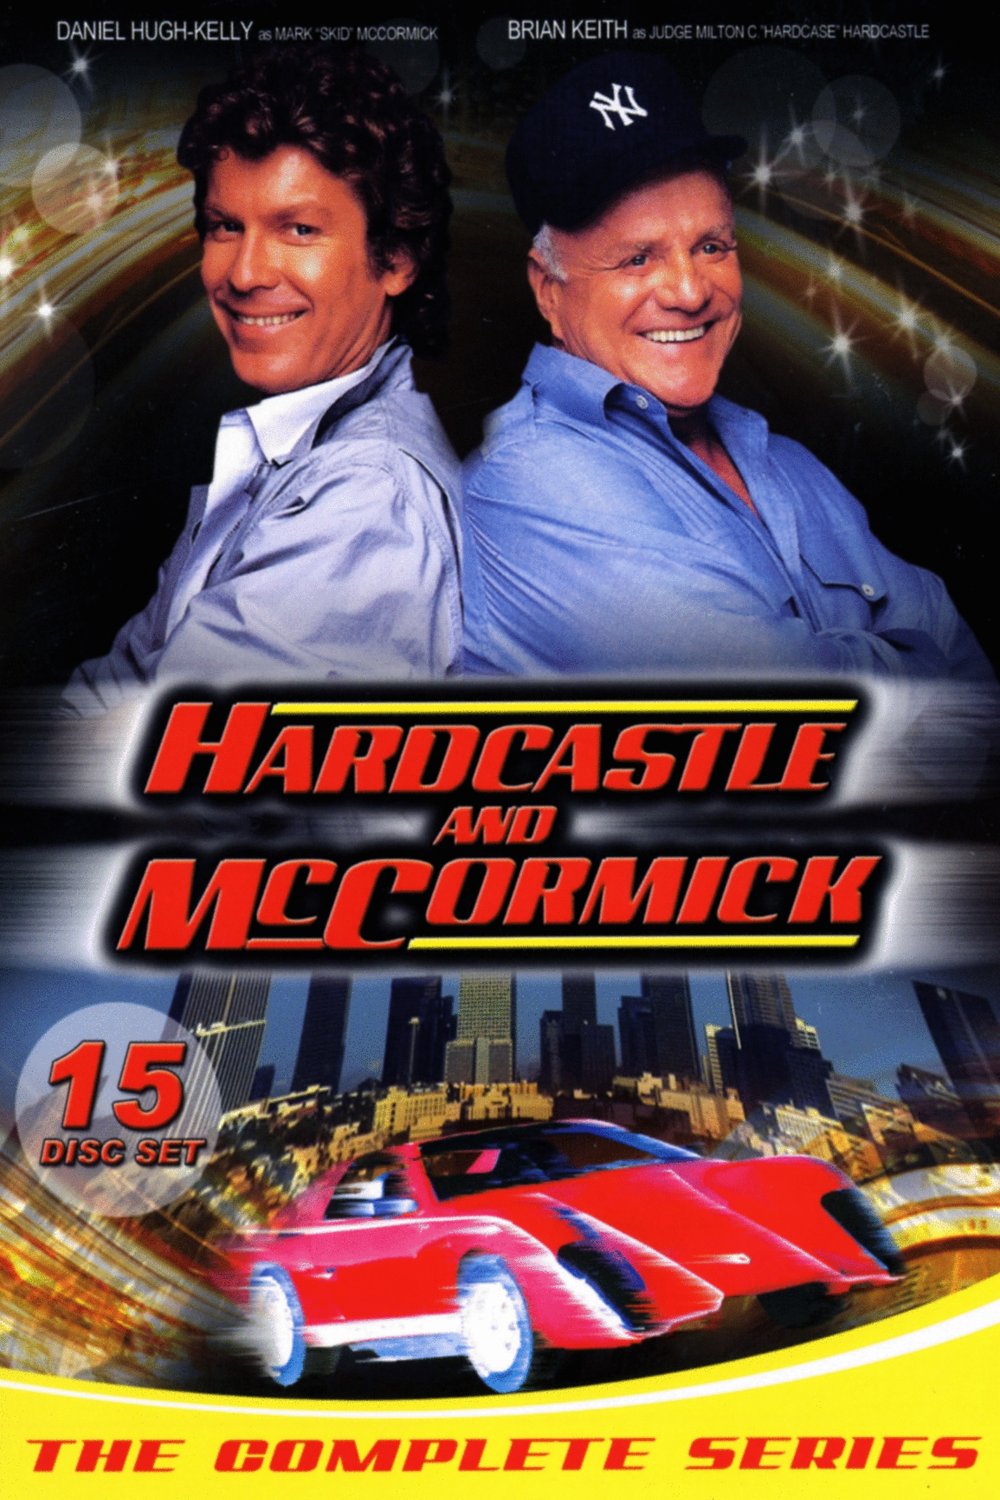 Poster of the movie Hardcastle and McCormick